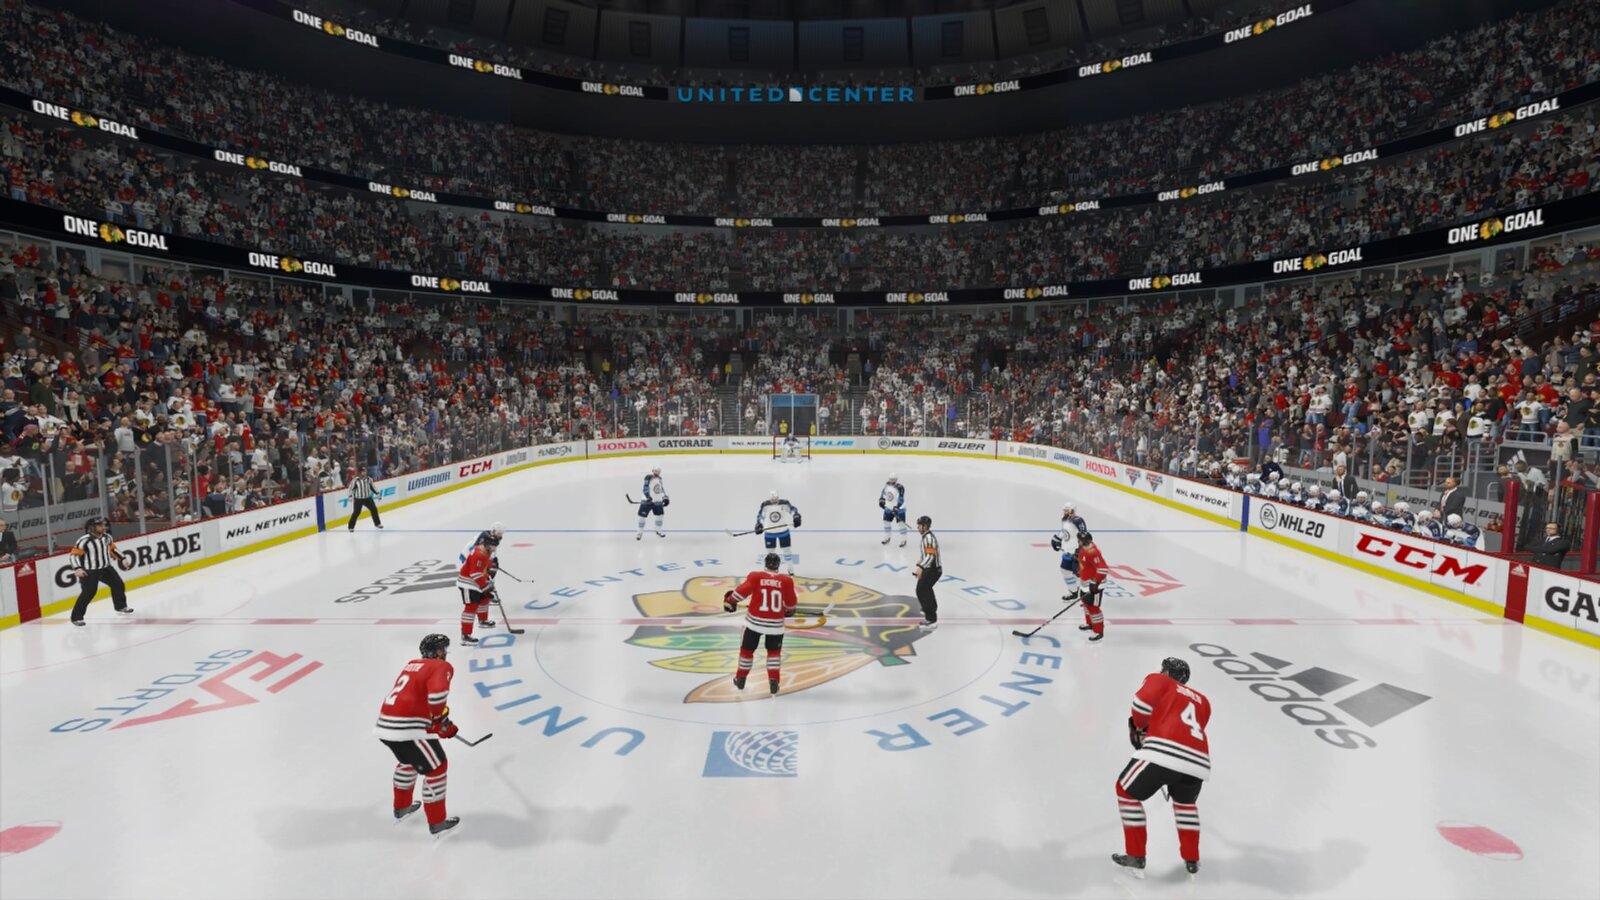 NHL 21 - 100 Points Pack